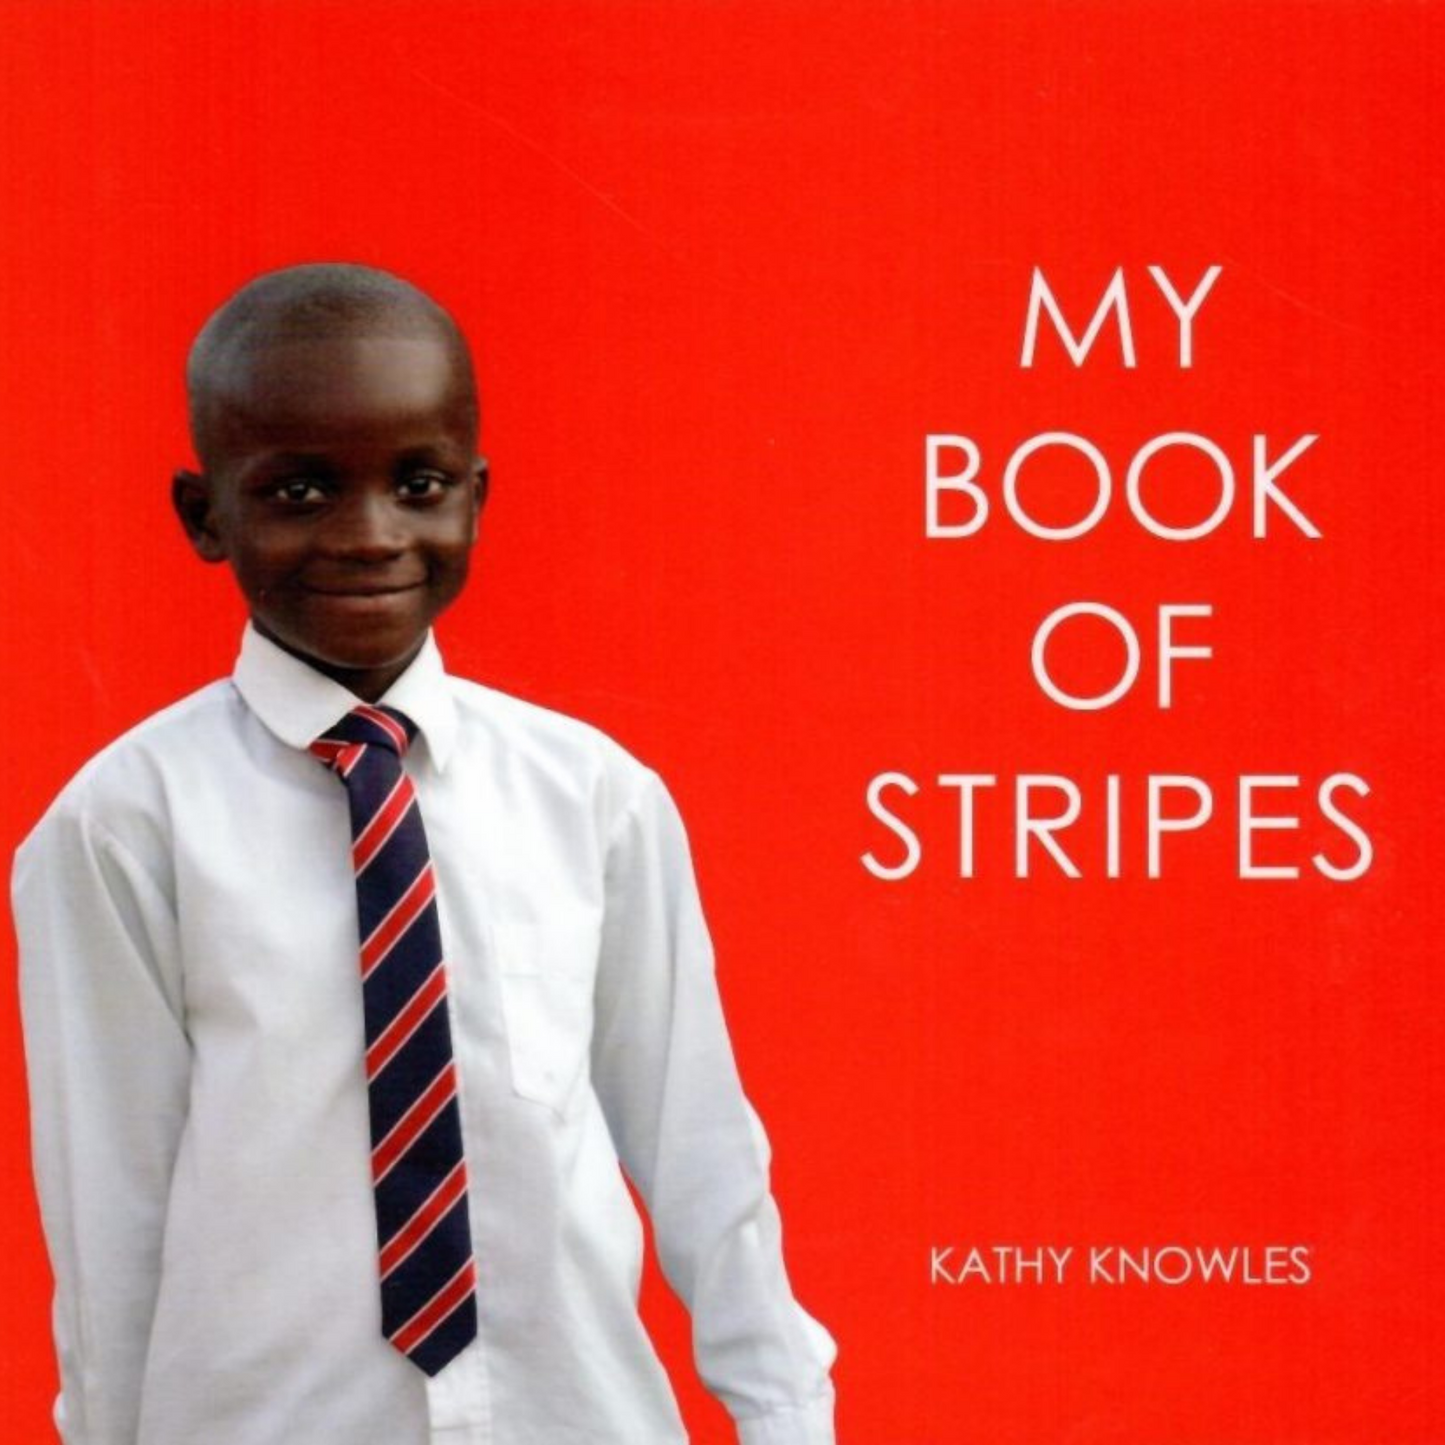 My Book of Stripes